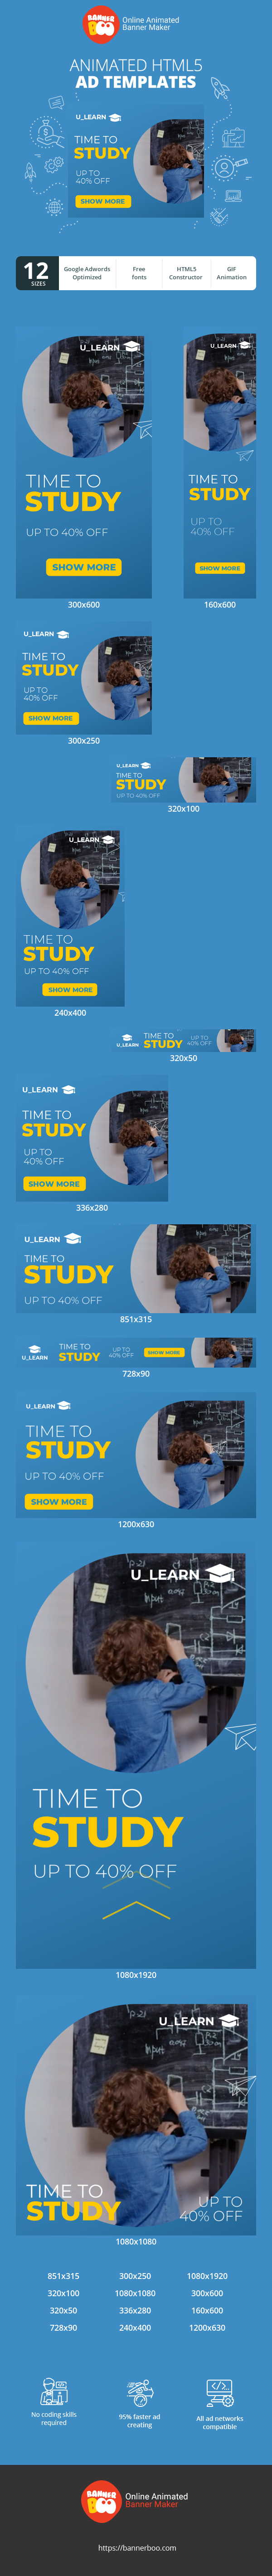 Banner ad template — Time To Study — Up To 40% Off